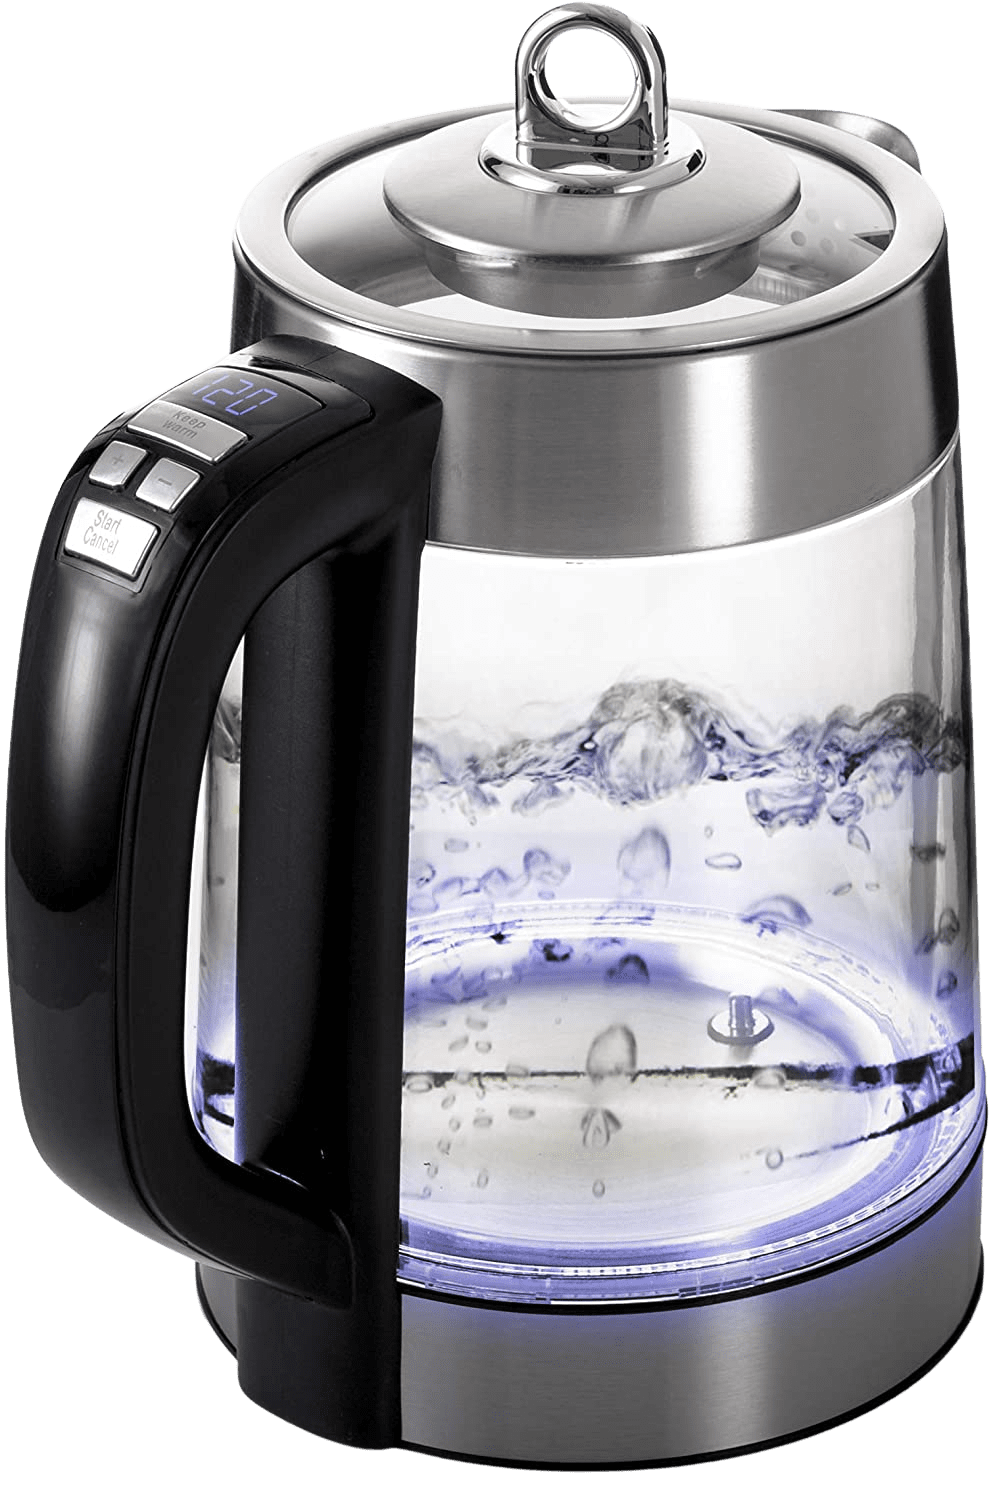 Fast-Boiling 1500W |  Double Wall Safe Touch Cordless Glass Electric Kettle with Digital Temperature Control l Spout Filter | Auto Shut Off + Bonus Tea Infuser - Home Decor Gifts and More